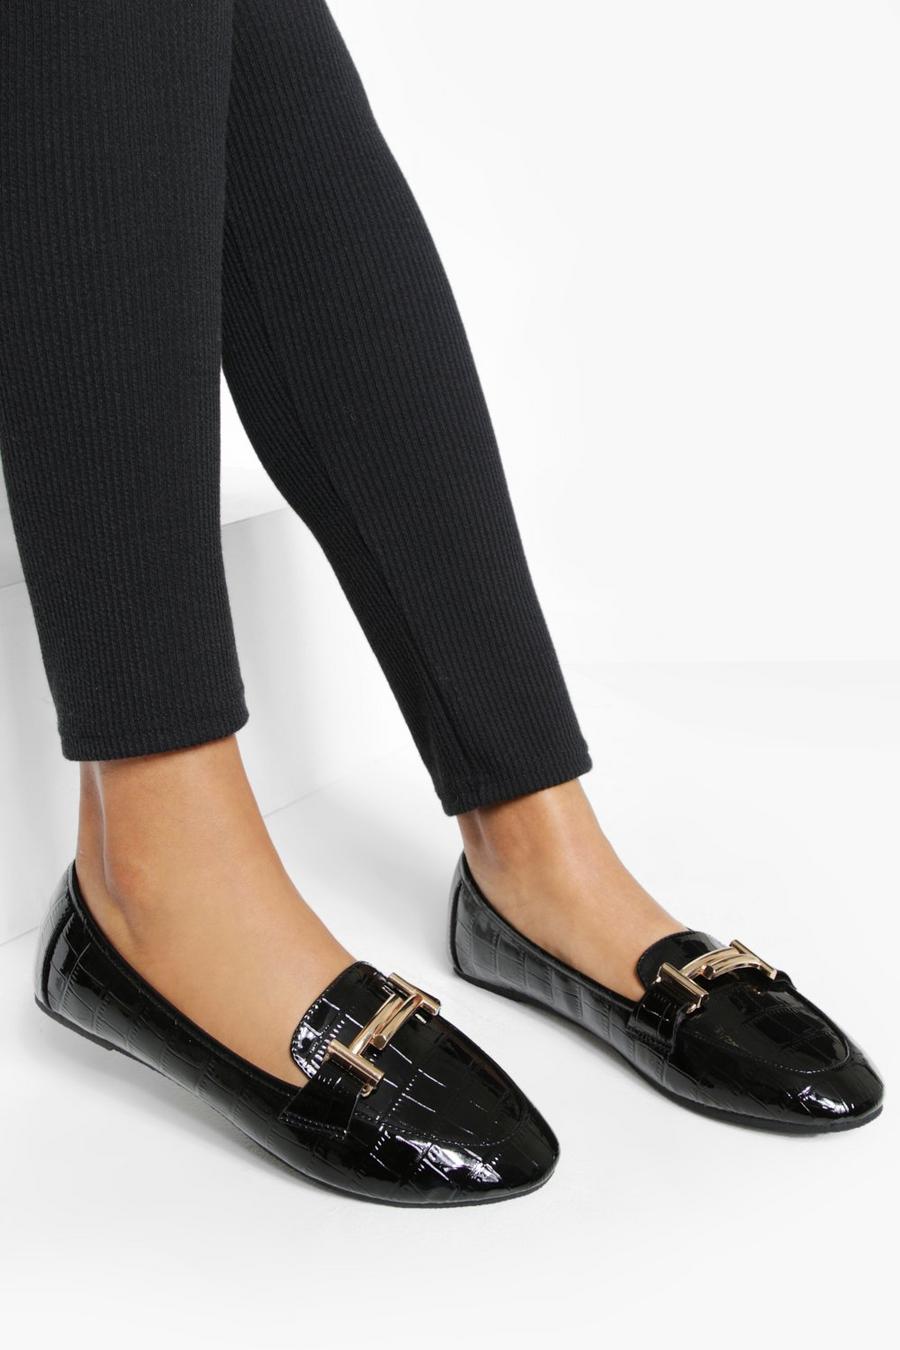 Black Wide Width Patent Croc Double Bar Loafers